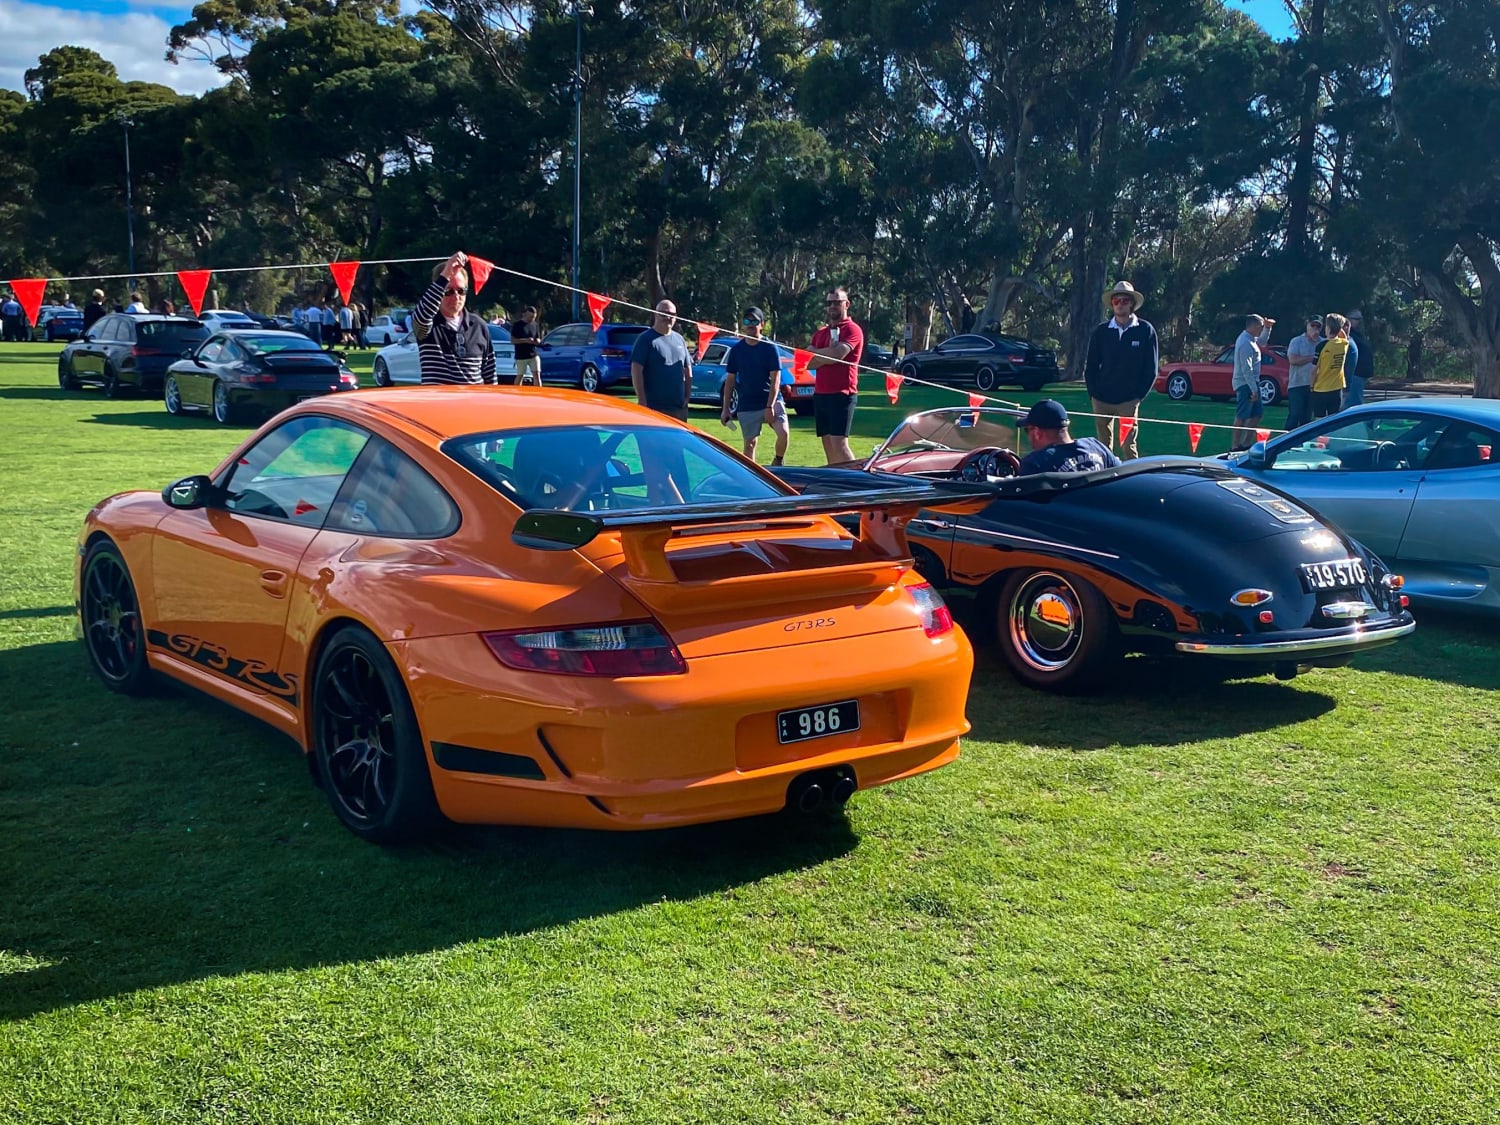 Not the first time I’ve seen this duo but i can never get sick of it! So which would you take? Porsche 997 GT3 RS or an authentic 1957 Porsche 356 Speedster